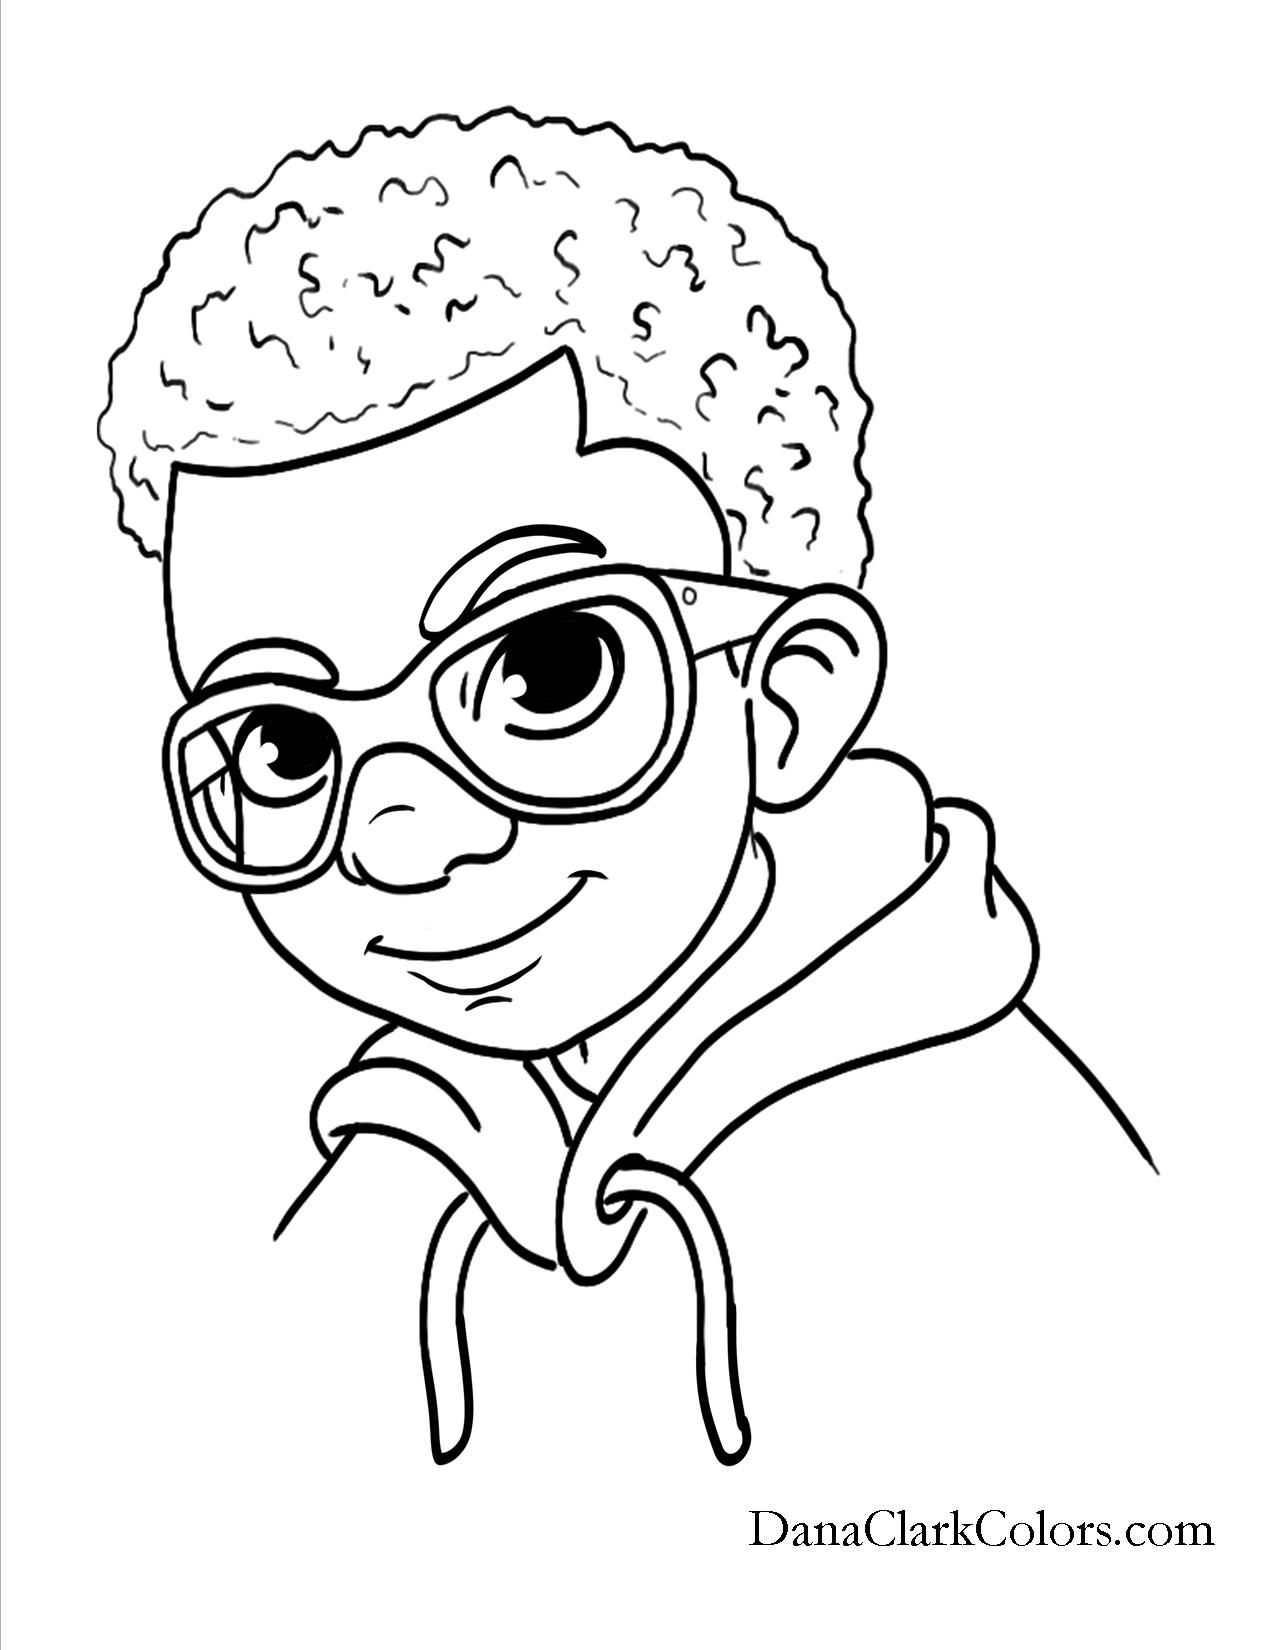 African American, Black, African, boys and girls of color - great coloring  pages | Coloring pages for girls, Coloring pages for boys, Coloring books